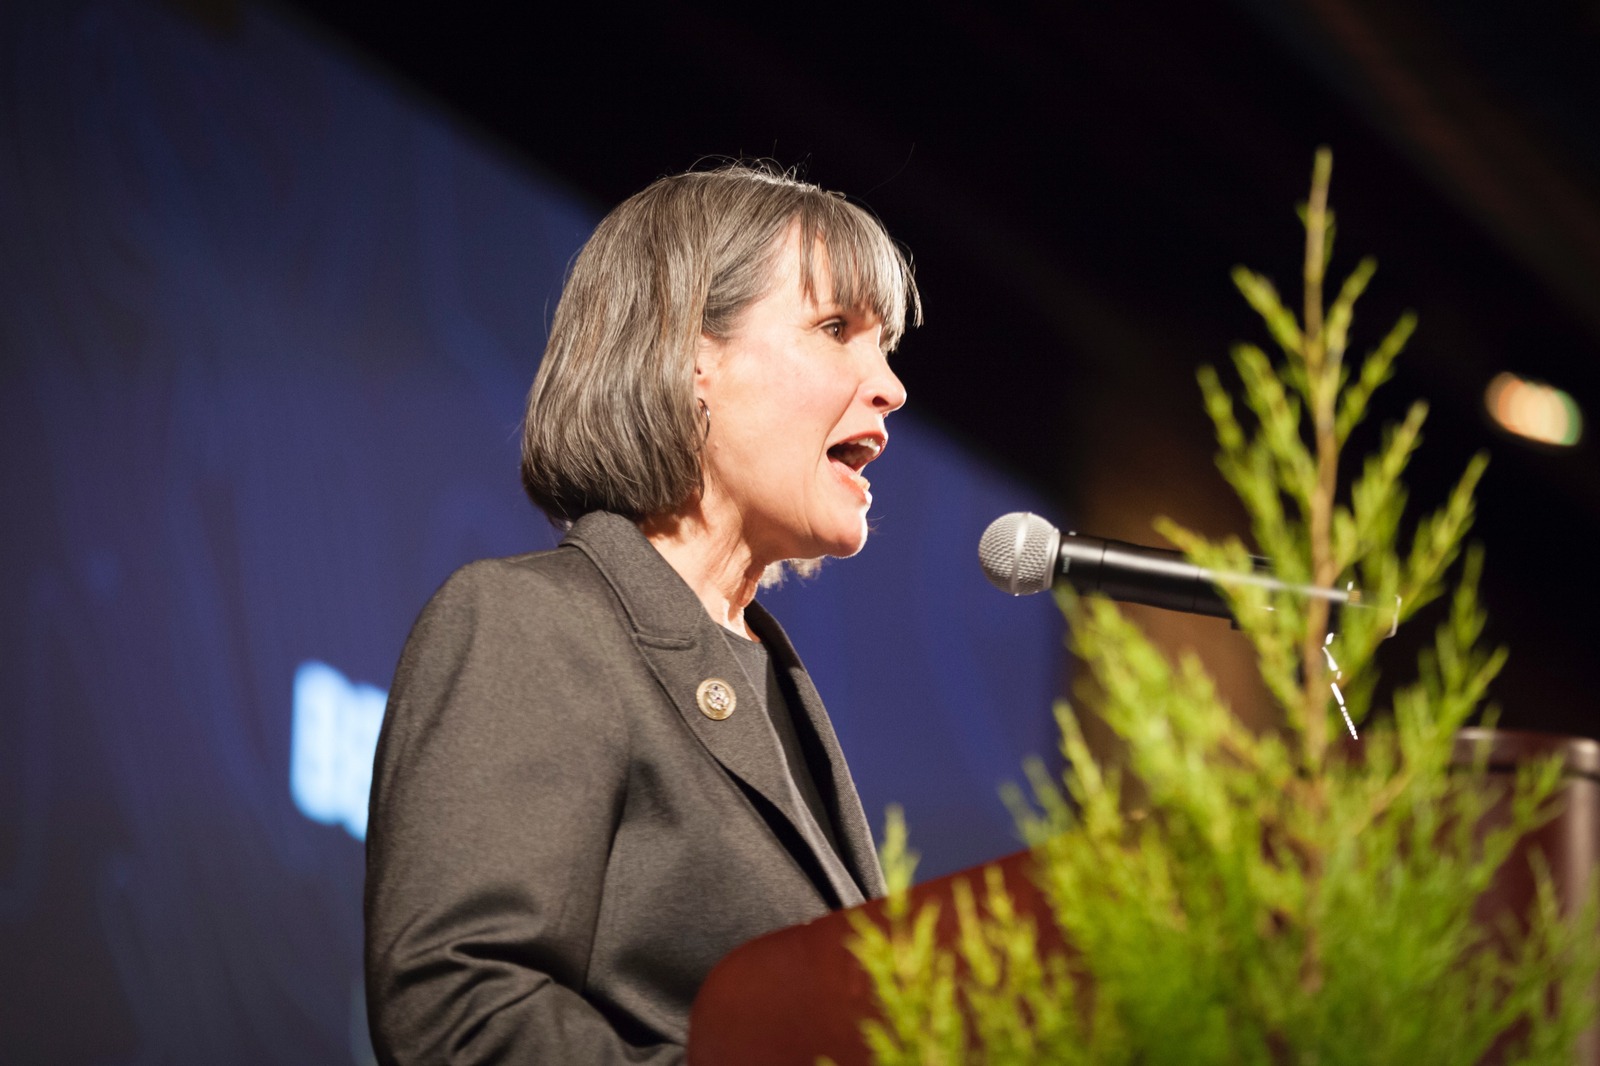 Congresswoman Betty McCollum of Minnesota has become a rising star in environmental protection, saying that maintaining water quality in the Land of 10,000 Lakes should not only be considered a source of pride for Minnesotans, whose lifestyles are closely identified with the outdoors, but as part of the public trust for lands that belong to all citizens. Photo courtesy Save the Boundary Waters.